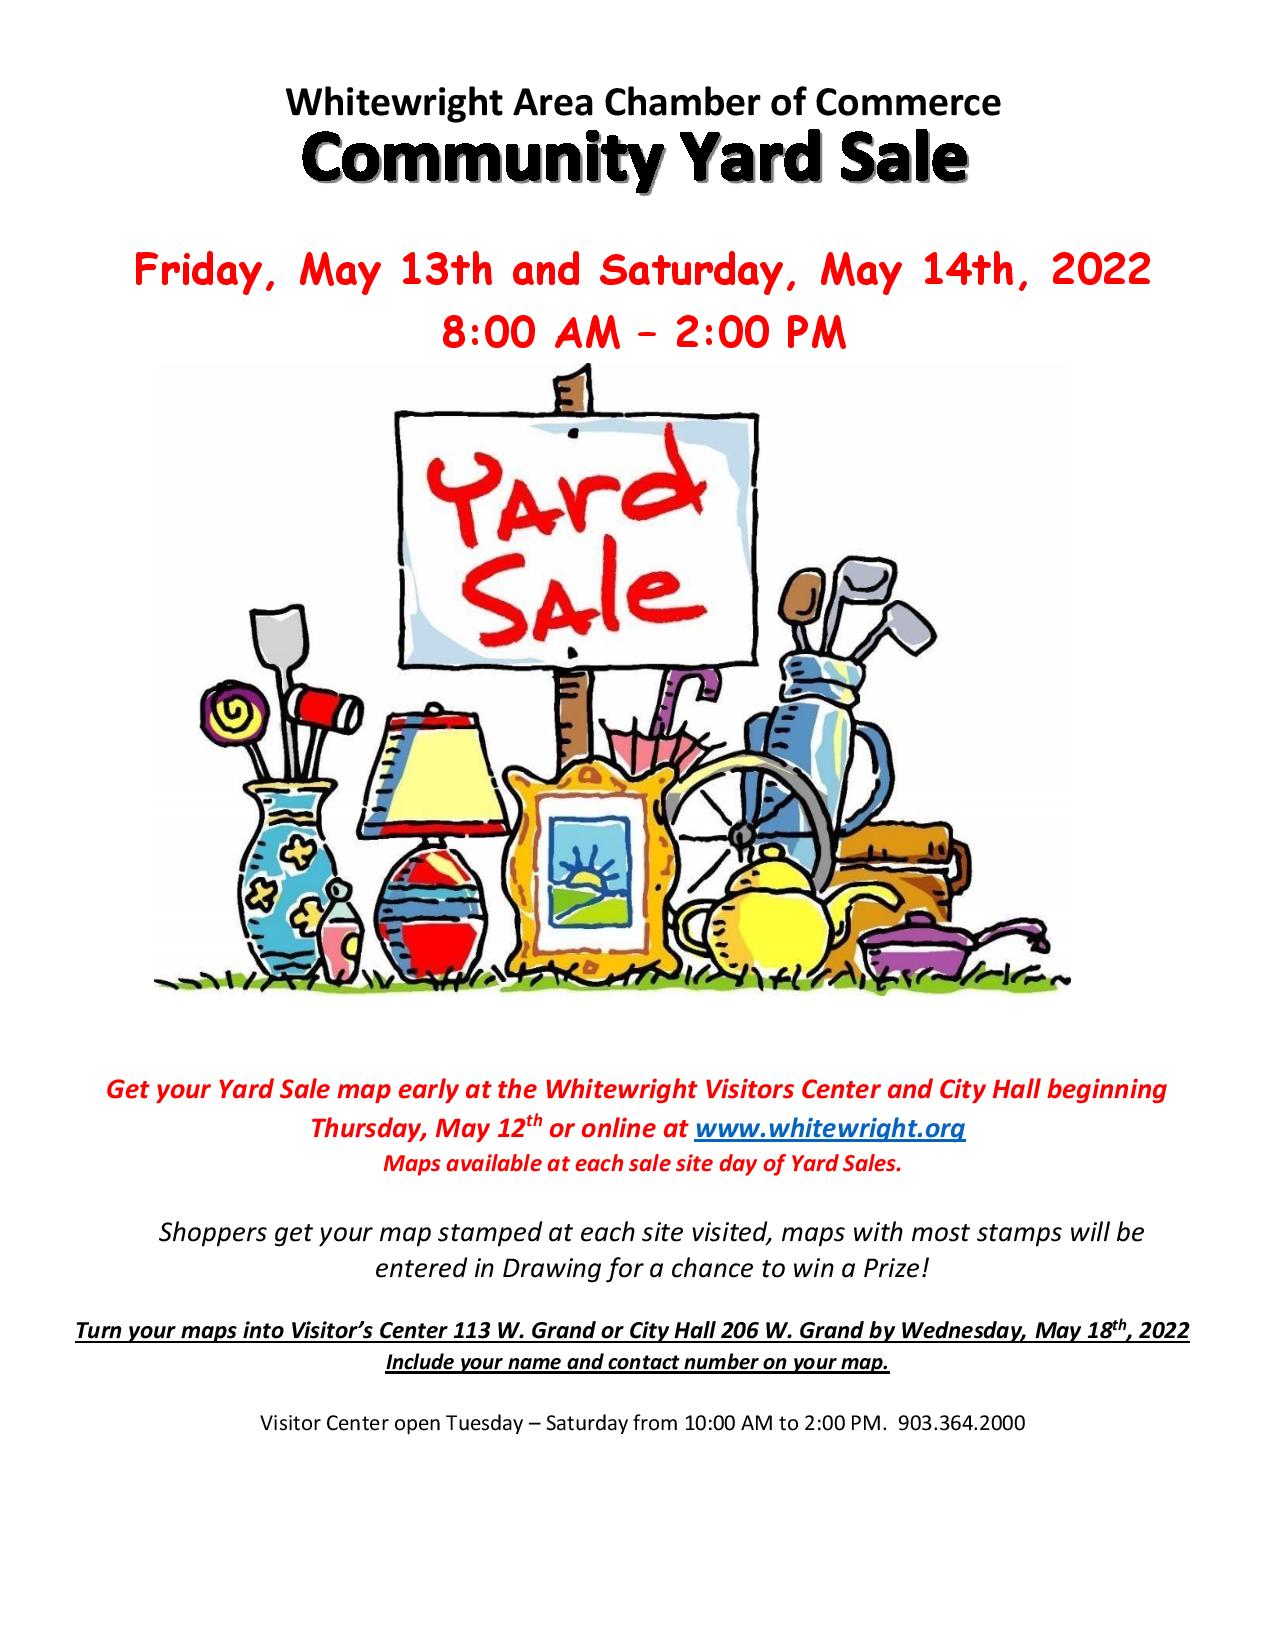 Whitewright Area Chamber of Commerce - Community Yard Sale May 13th & 14th (Map)